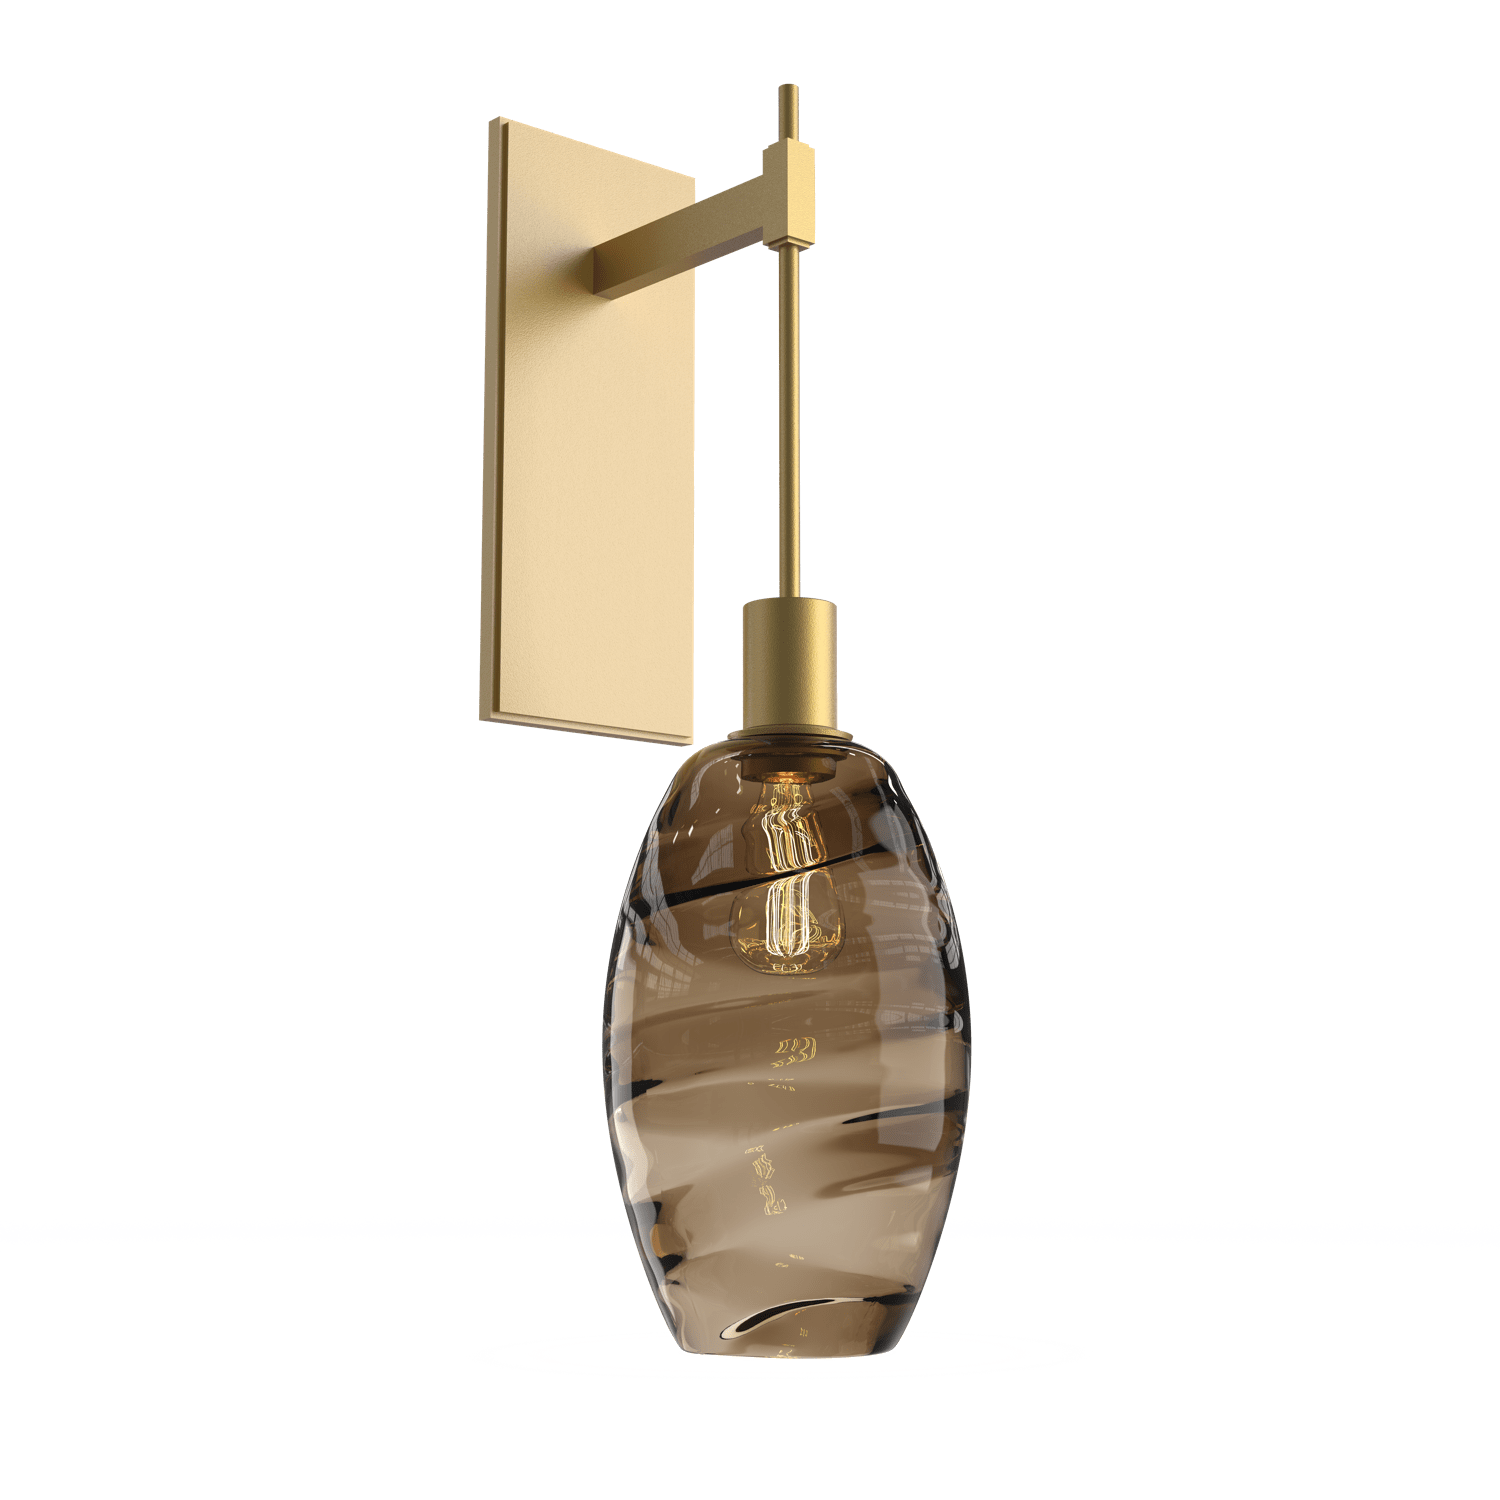 IDB0035-24-GB-OB-Hammerton-Studio-Optic-Blown-Glass-Elisse-tempo-wall-sconce-with-gilded-brass-finish-and-optic-bronze-blown-glass-shades-and-incandescent-lamping